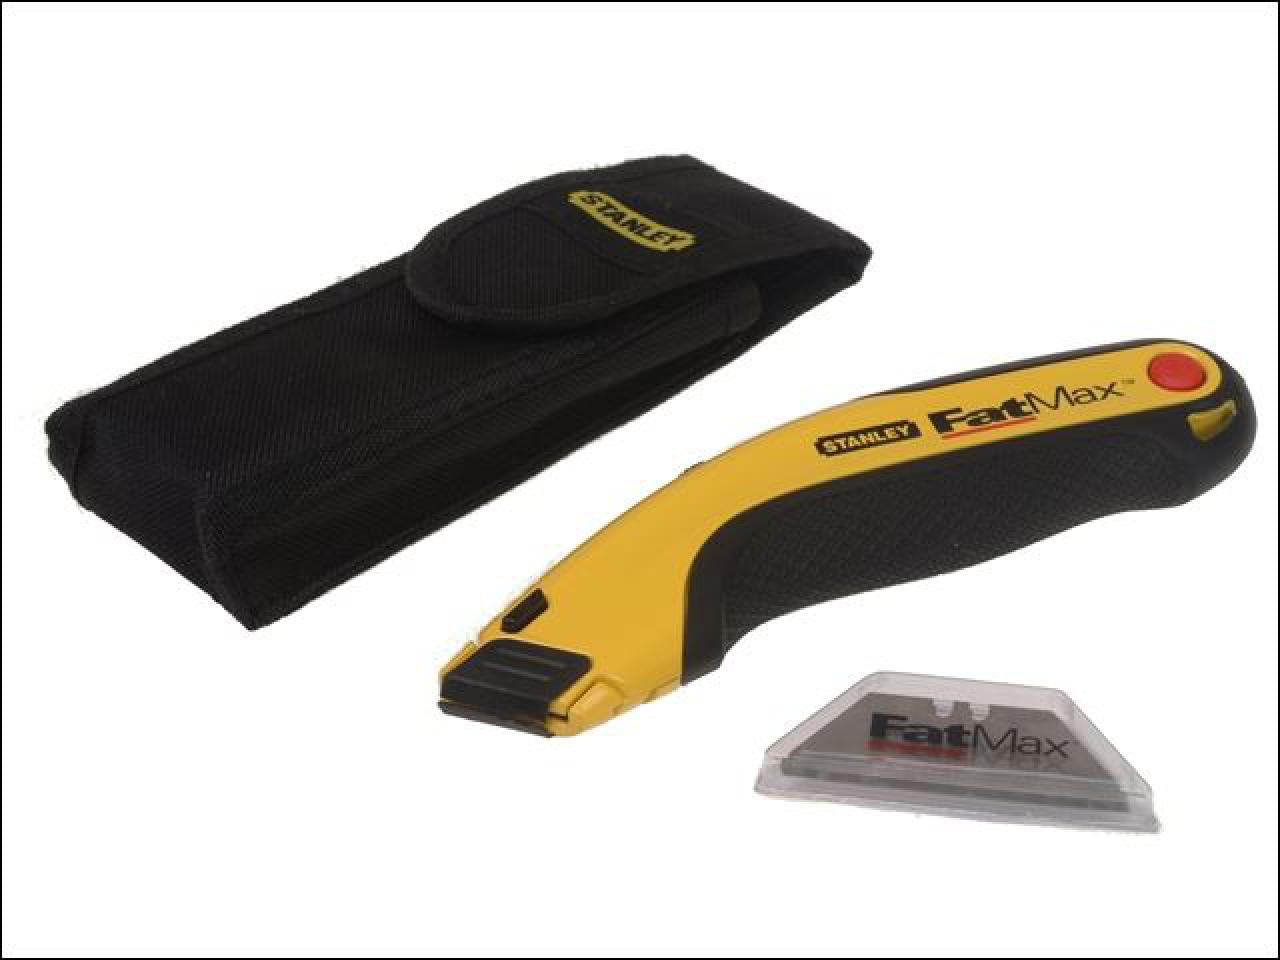 FatMax Retractable Utility Knife, Stanley, 10-778